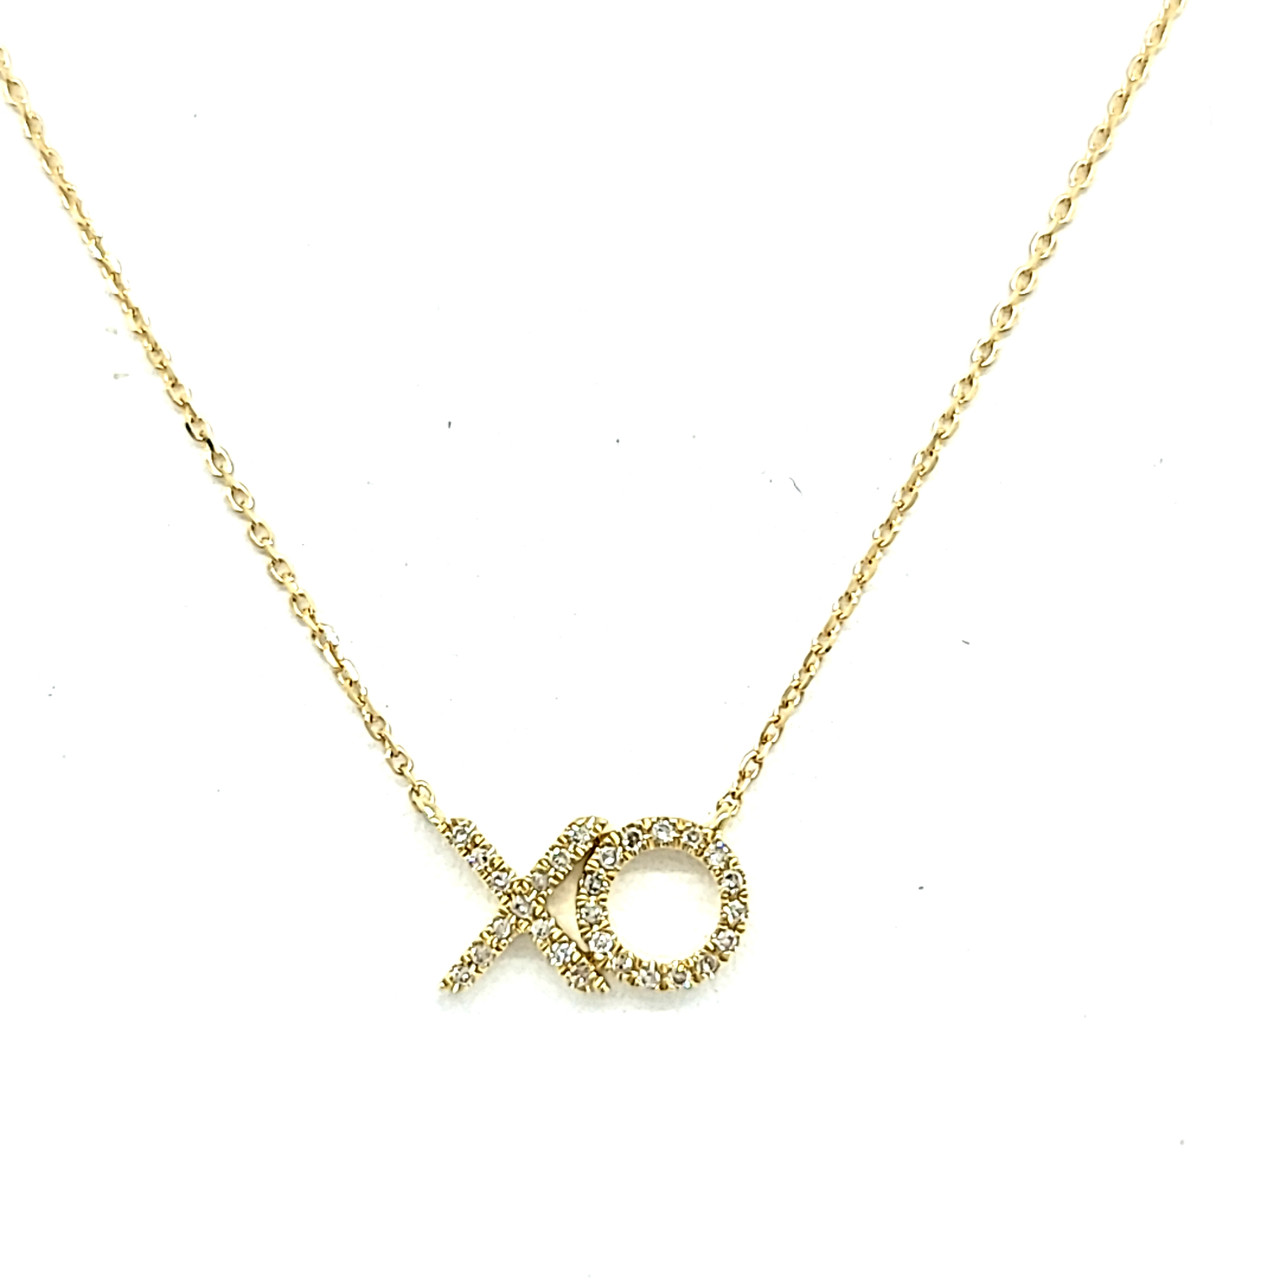 Buy Name Necklace, XO Necklace 14k Gold, Anniversary Gifts for Her, Gift  for Wife, Girlfriend Gift Online in India - Etsy